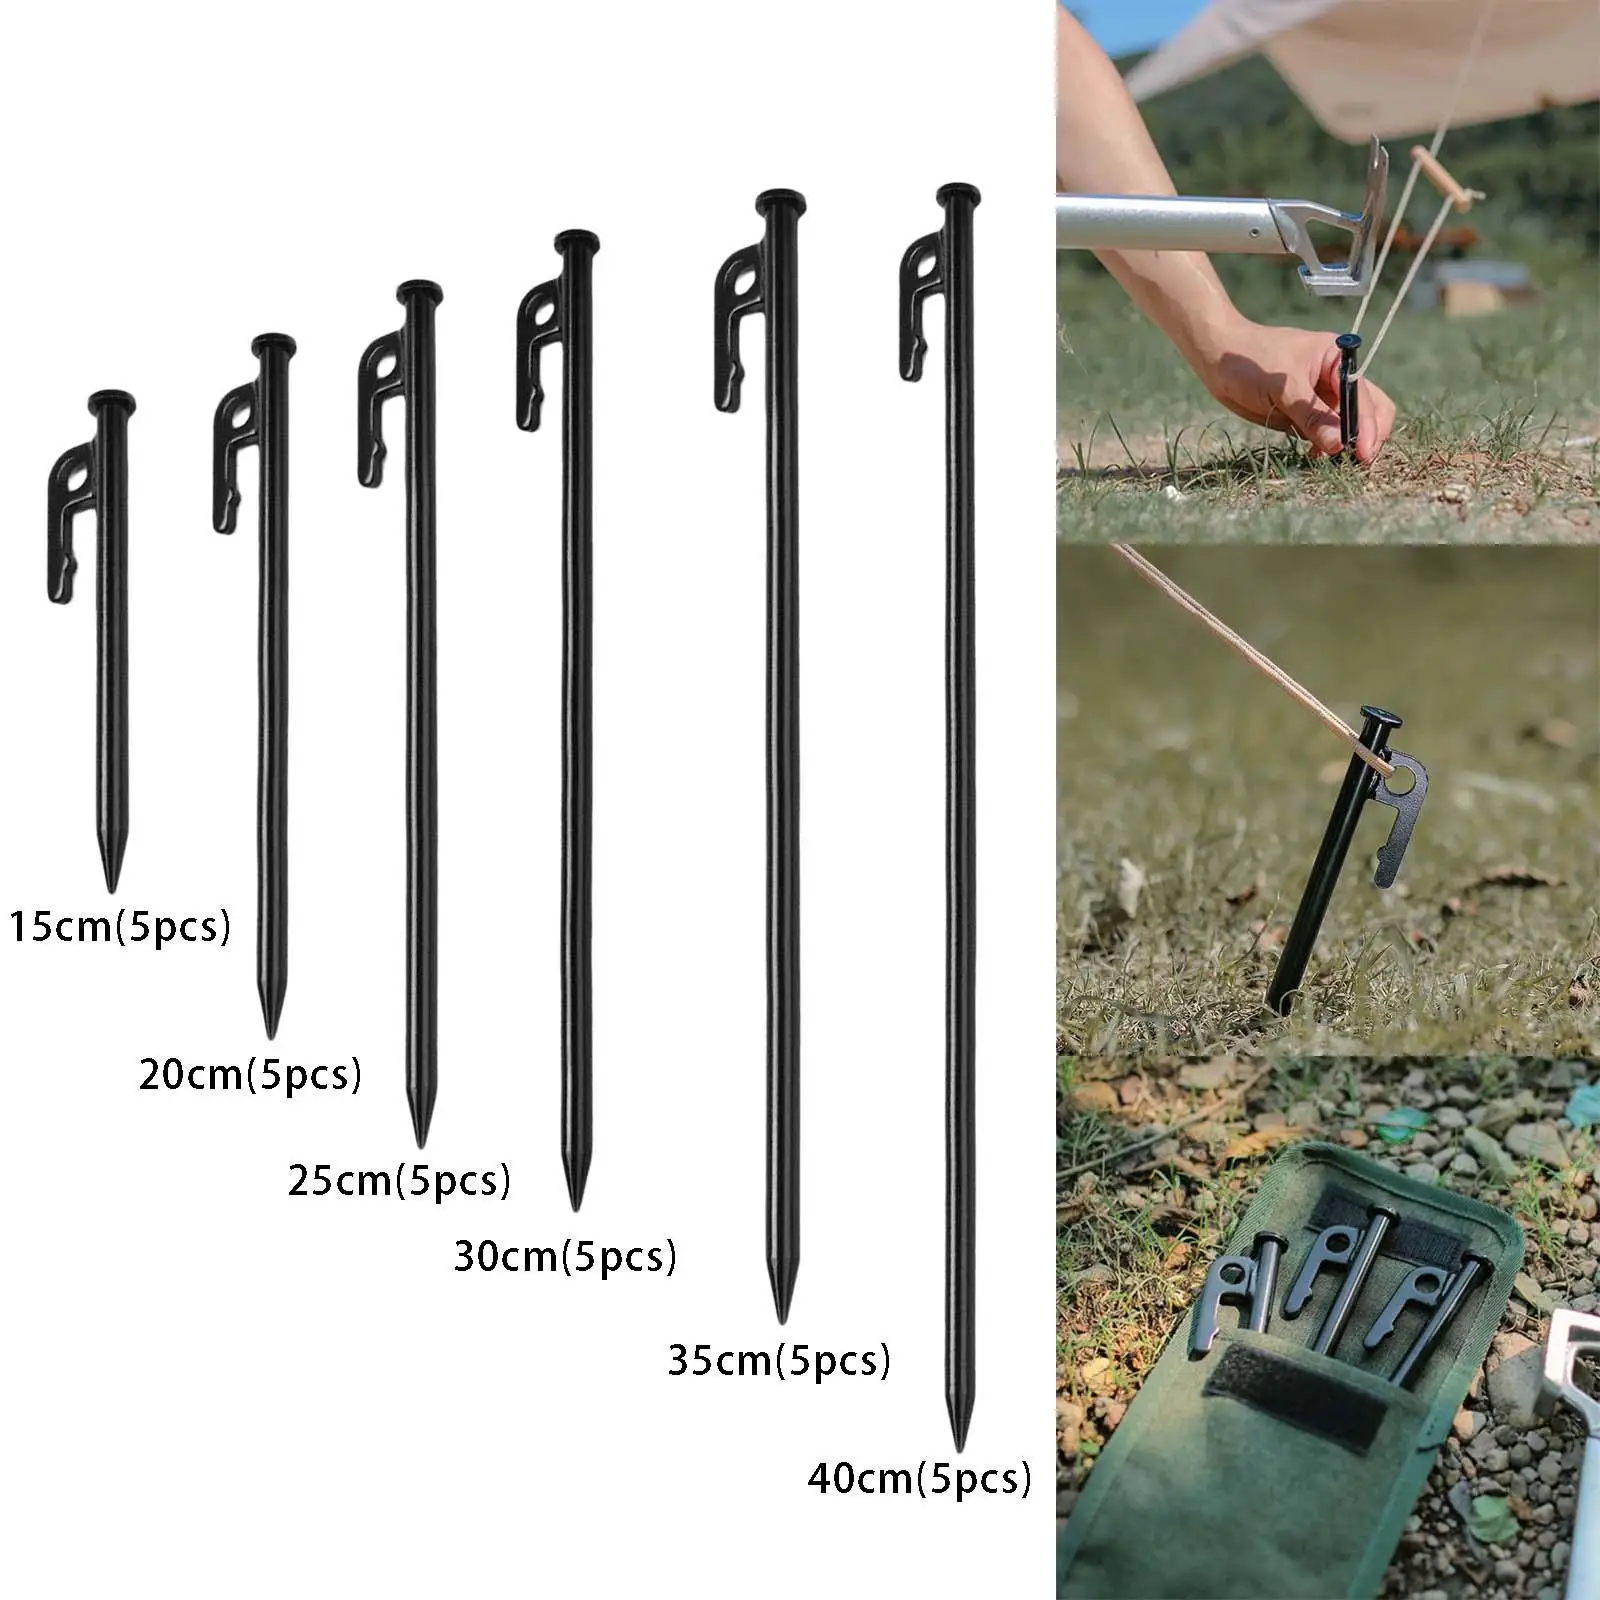 5Pcs Portable Camping Stakes Steel Nails Tent Accessories Unbreakable Tent Pegs for Gardening Outdoor Backpacking Picnic Canopy